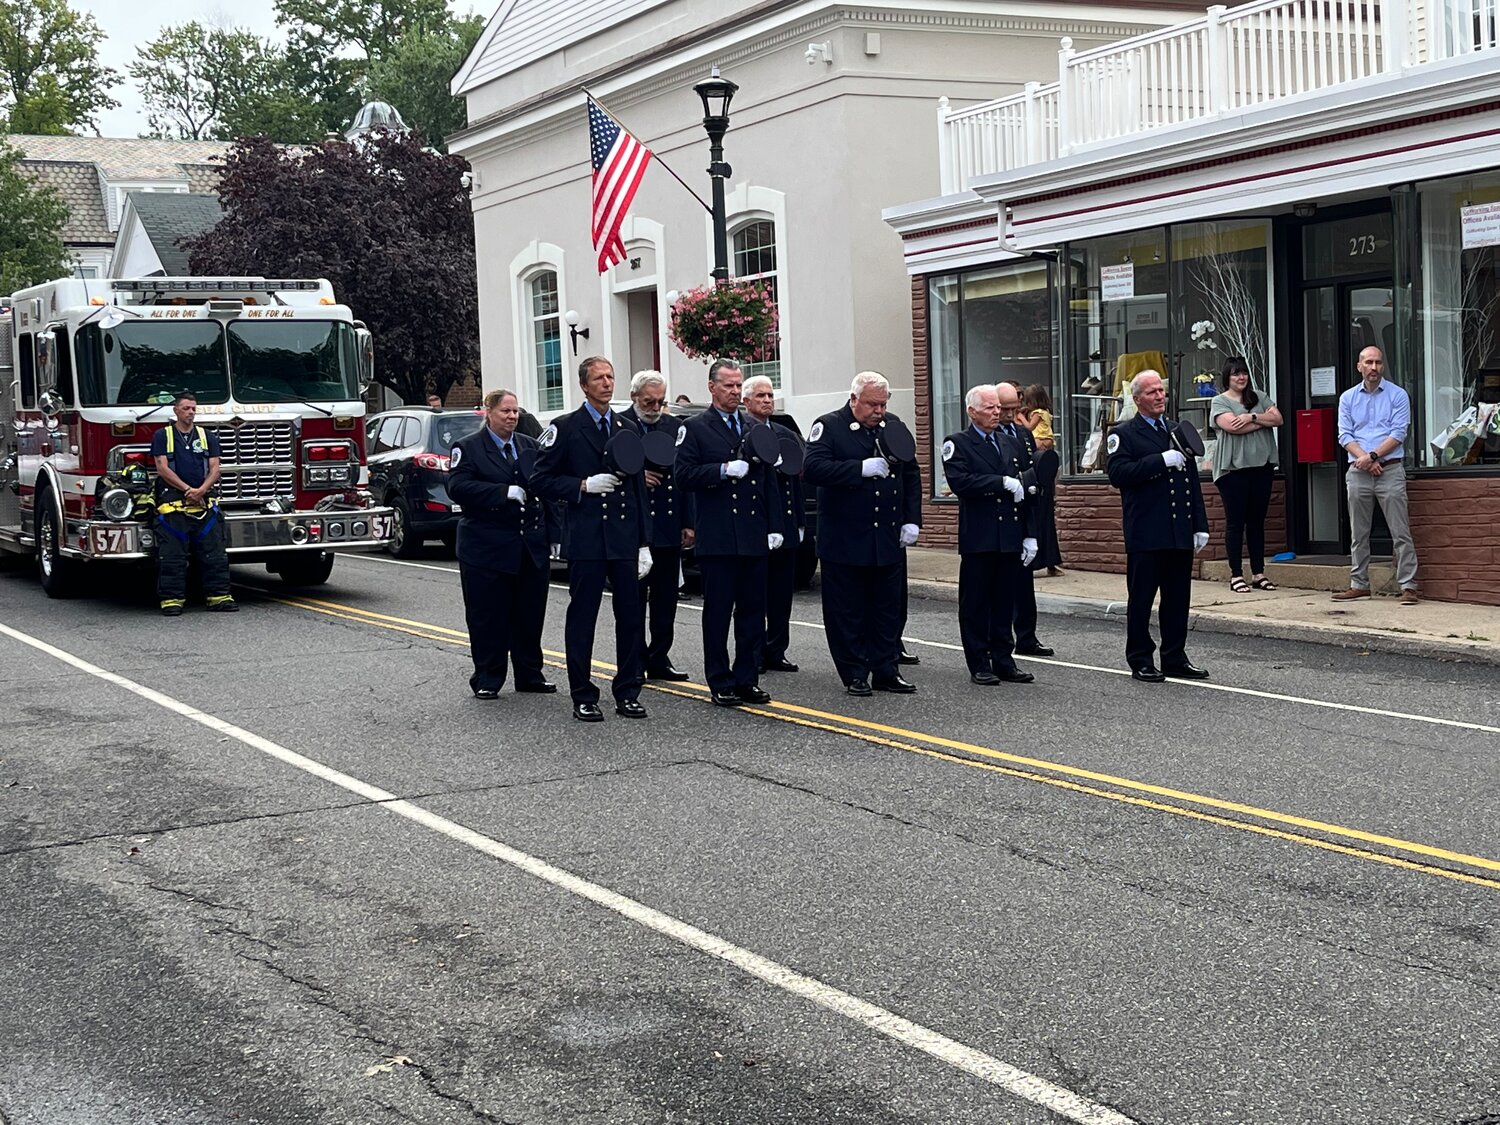 Members of the Sea Cliff Fire Department were there to honor the first responders who gave their lives on Sept. 11, 2001.